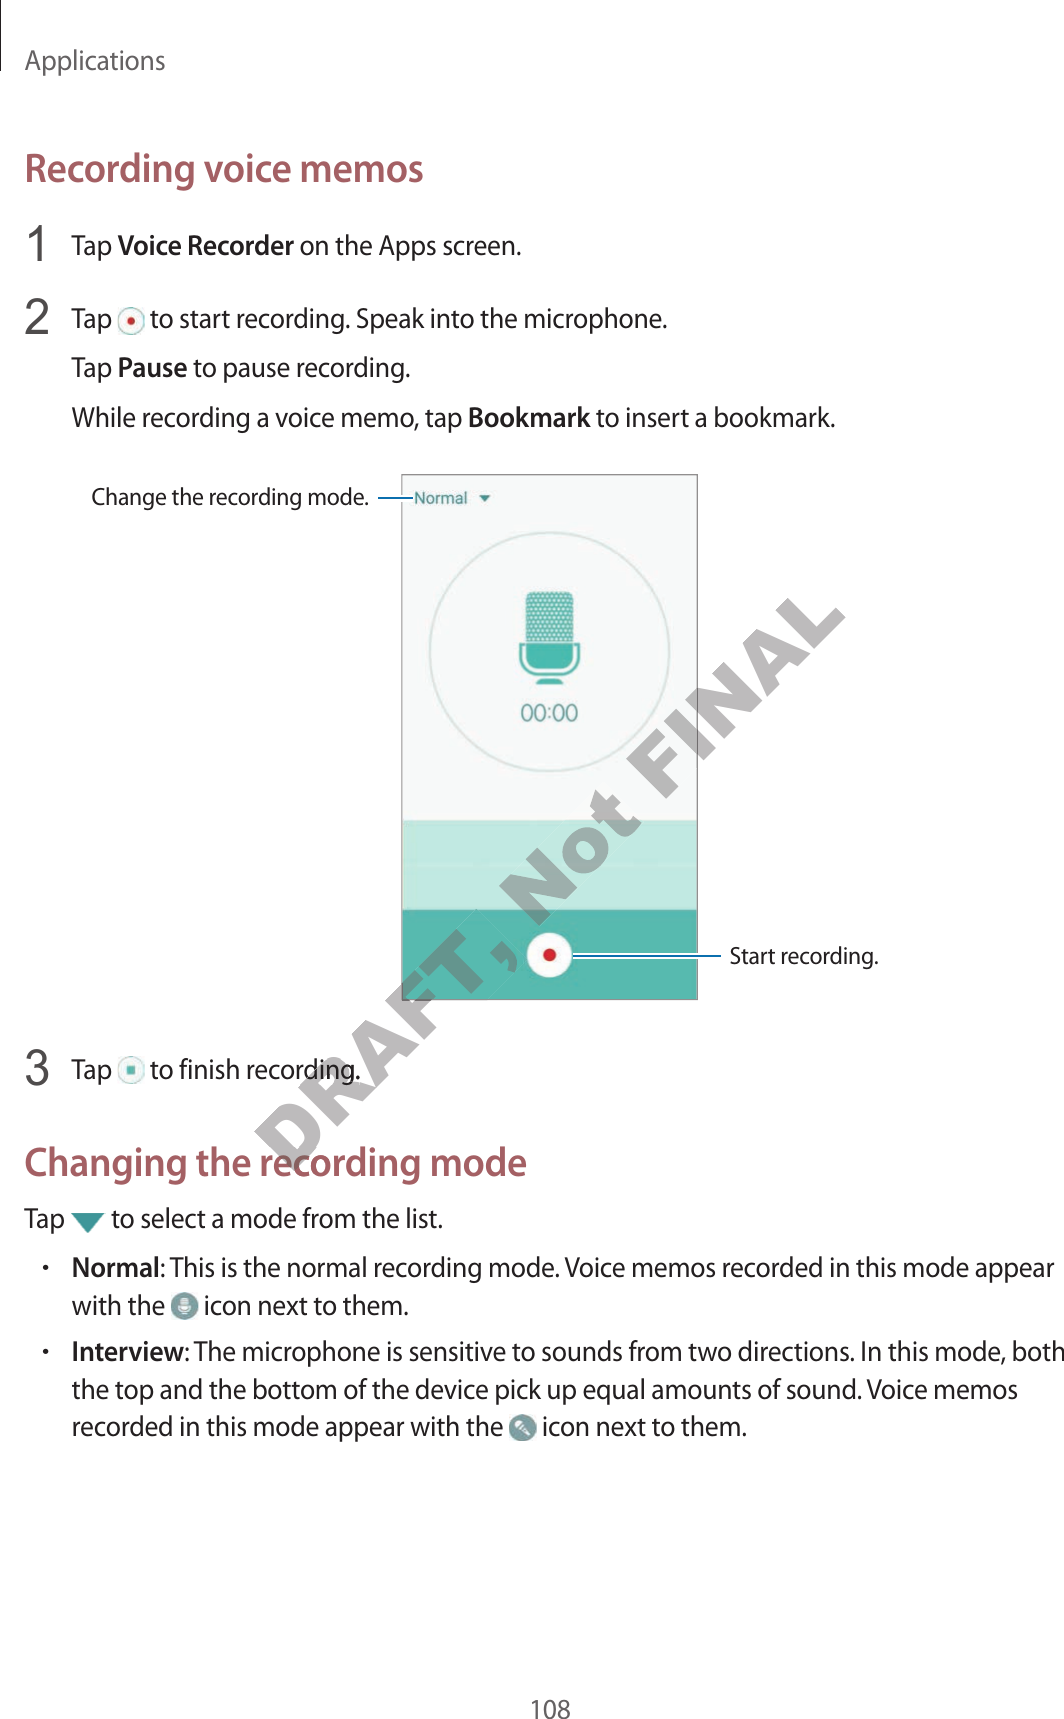 Applications108Recor ding v oic e memos1  Tap Voice Recorder on the Apps screen.2  Tap   to start recording. Speak into the microphone.Tap Pause to pause rec or ding .While rec or ding a v oice memo, tap Bookmark to insert a bookmark.Change the recor ding mode .Start recor ding.3  Tap   to finish recor ding .Changing the r ec or ding modeTap   to select a mode from the list.•Normal: This is the normal recor ding mode . Voice memos rec or ded in this mode appearwith the   icon next to them.•Interview: The microphone is sensitiv e t o sounds fr om two dir ections. In this mode, boththe top and the bottom of the devic e pick up equal amounts of sound . Voice memosrecor ded in this mode appear with the   icon next to them.DRAFT, DRAFT, DRAFT,  to finish rec or ding .DRAFT,  to finish rec or ding .Changing the r ec or ding modeDRAFT, Changing the r ec or ding modeNot FINALFINALFINAL